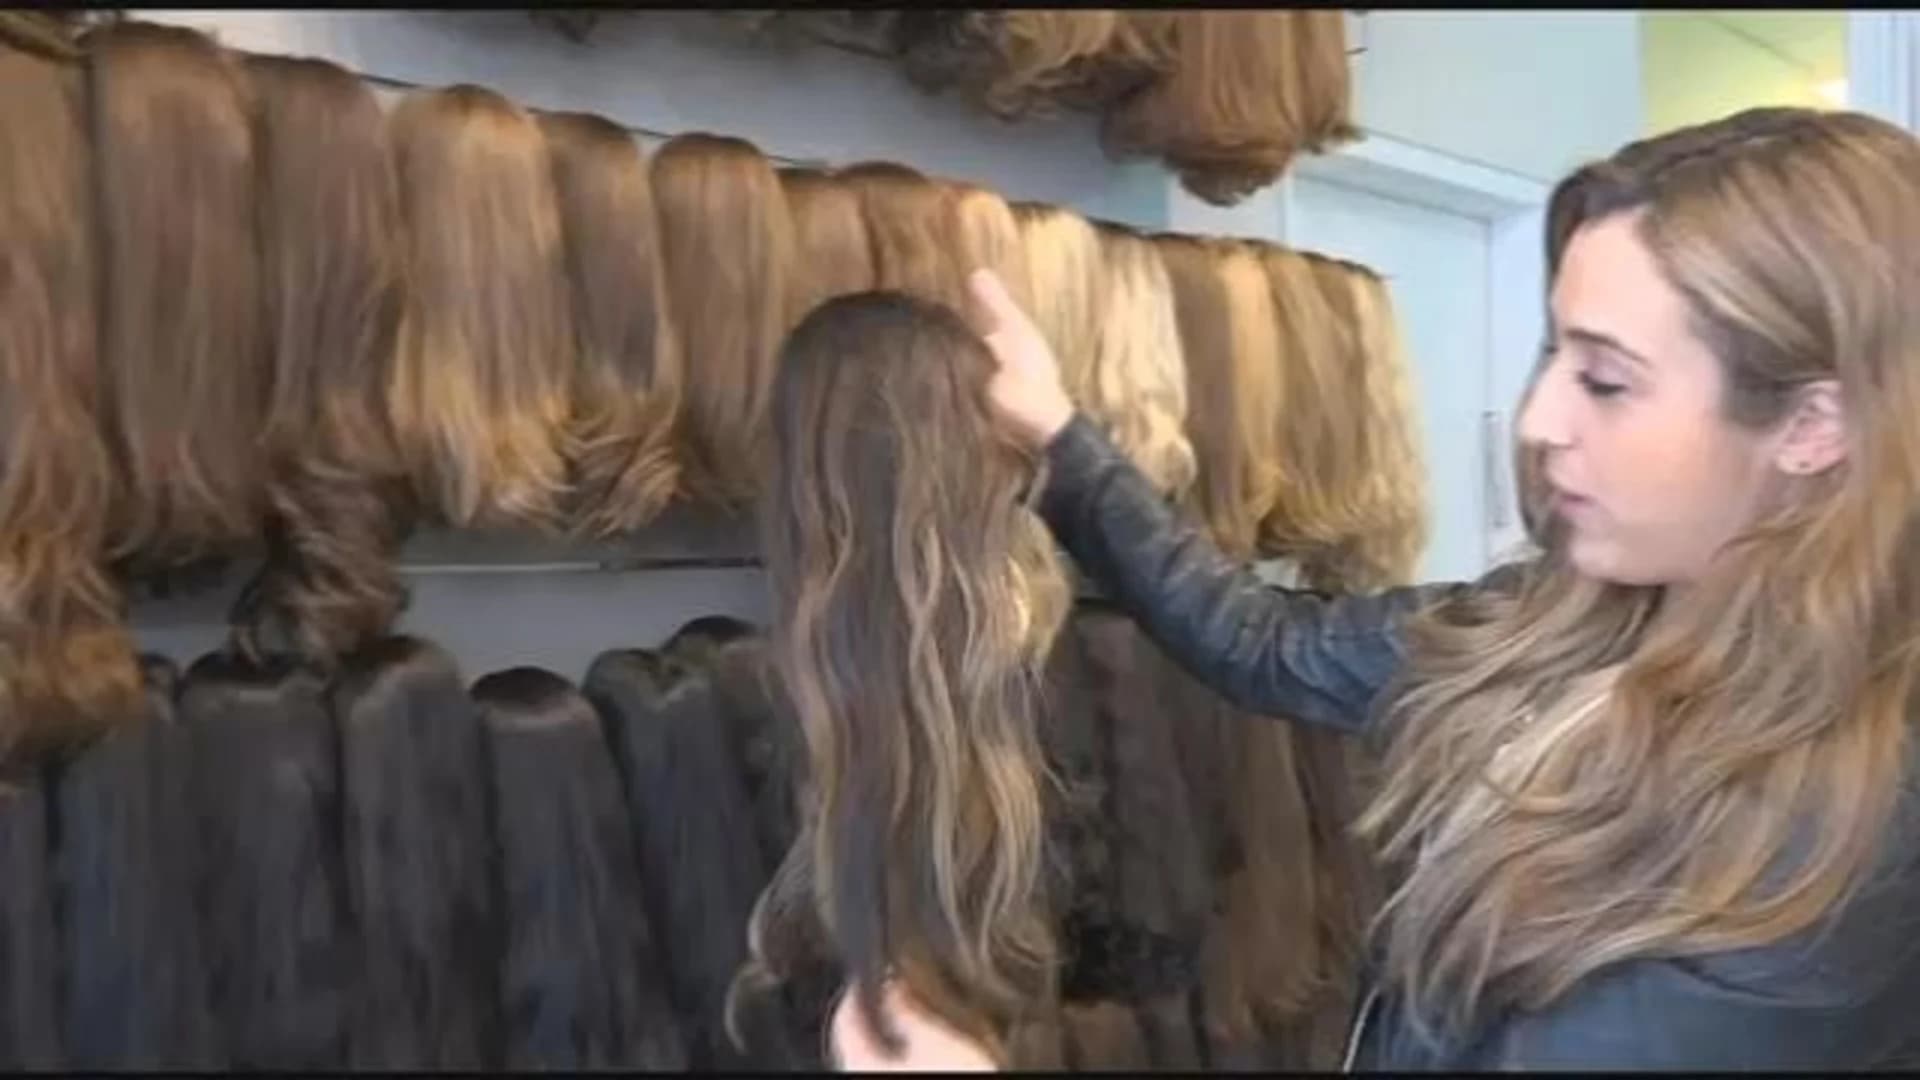 Brooklyn wig shop provides women a fashionable way to express themselves